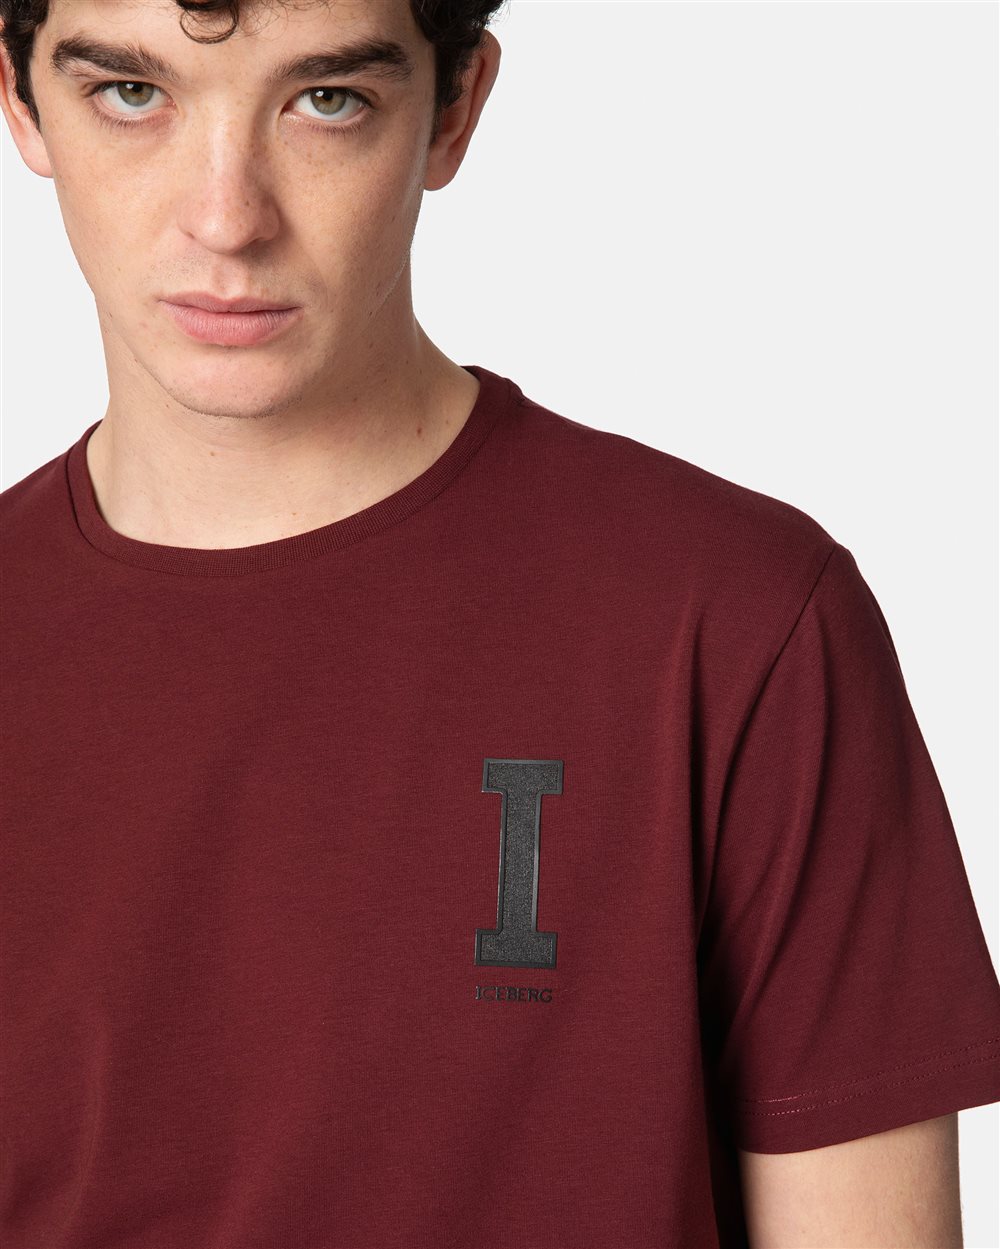 Bordeaux T-shirt with studded logo - Iceberg - Official Website